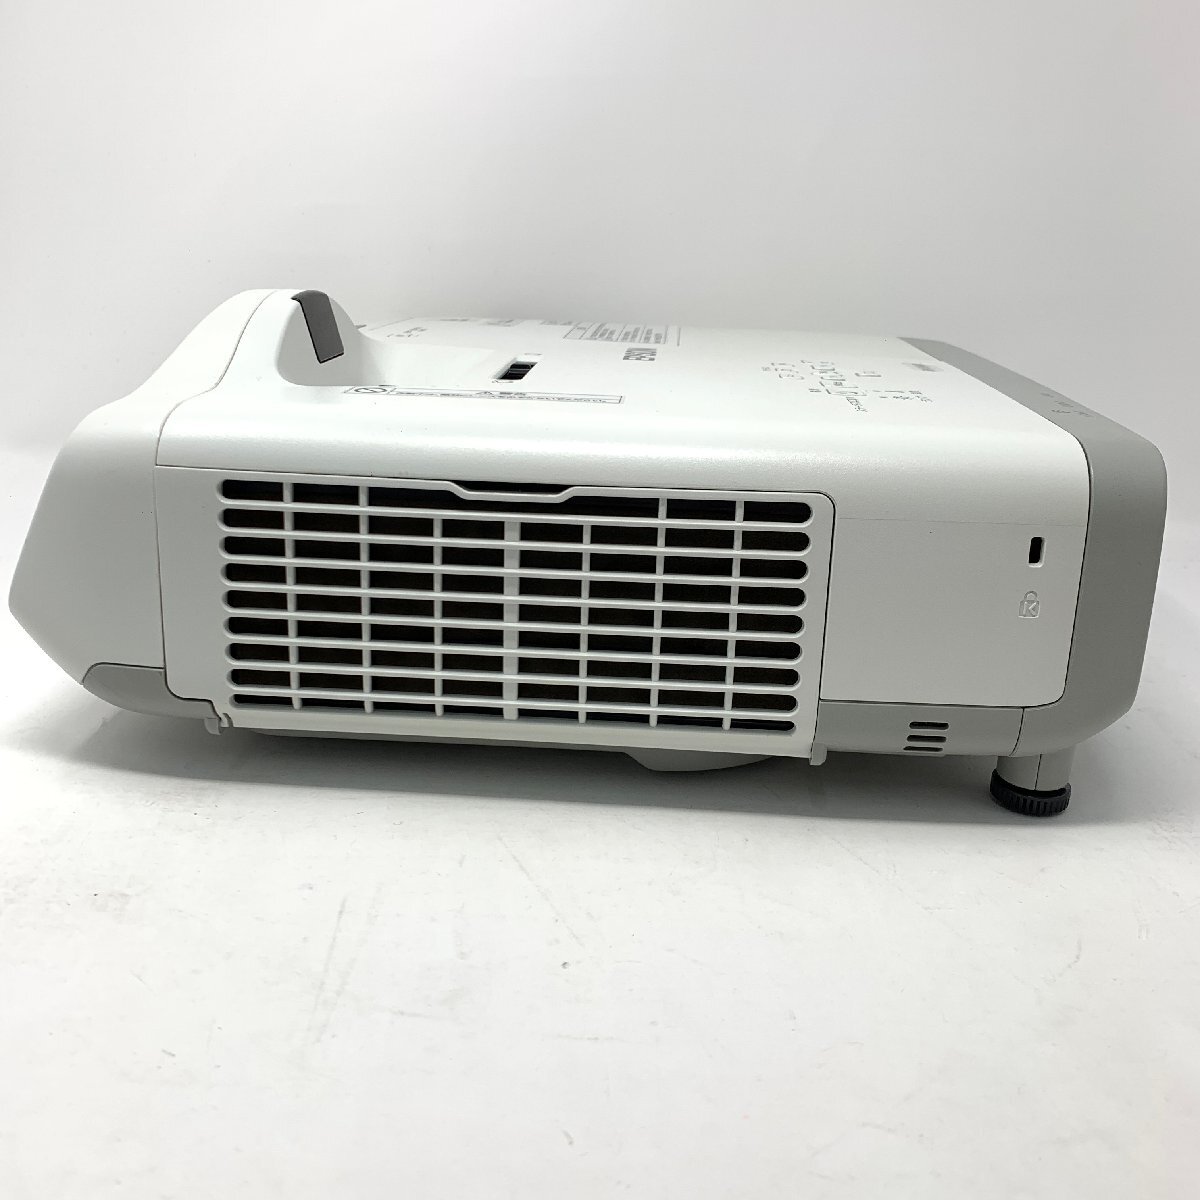 [ height adjustment for pair / lens cover lack of ] lamp 829 hour EB-536WT EPSON projector 3400lm WXGA HDMI 3LCD/0113